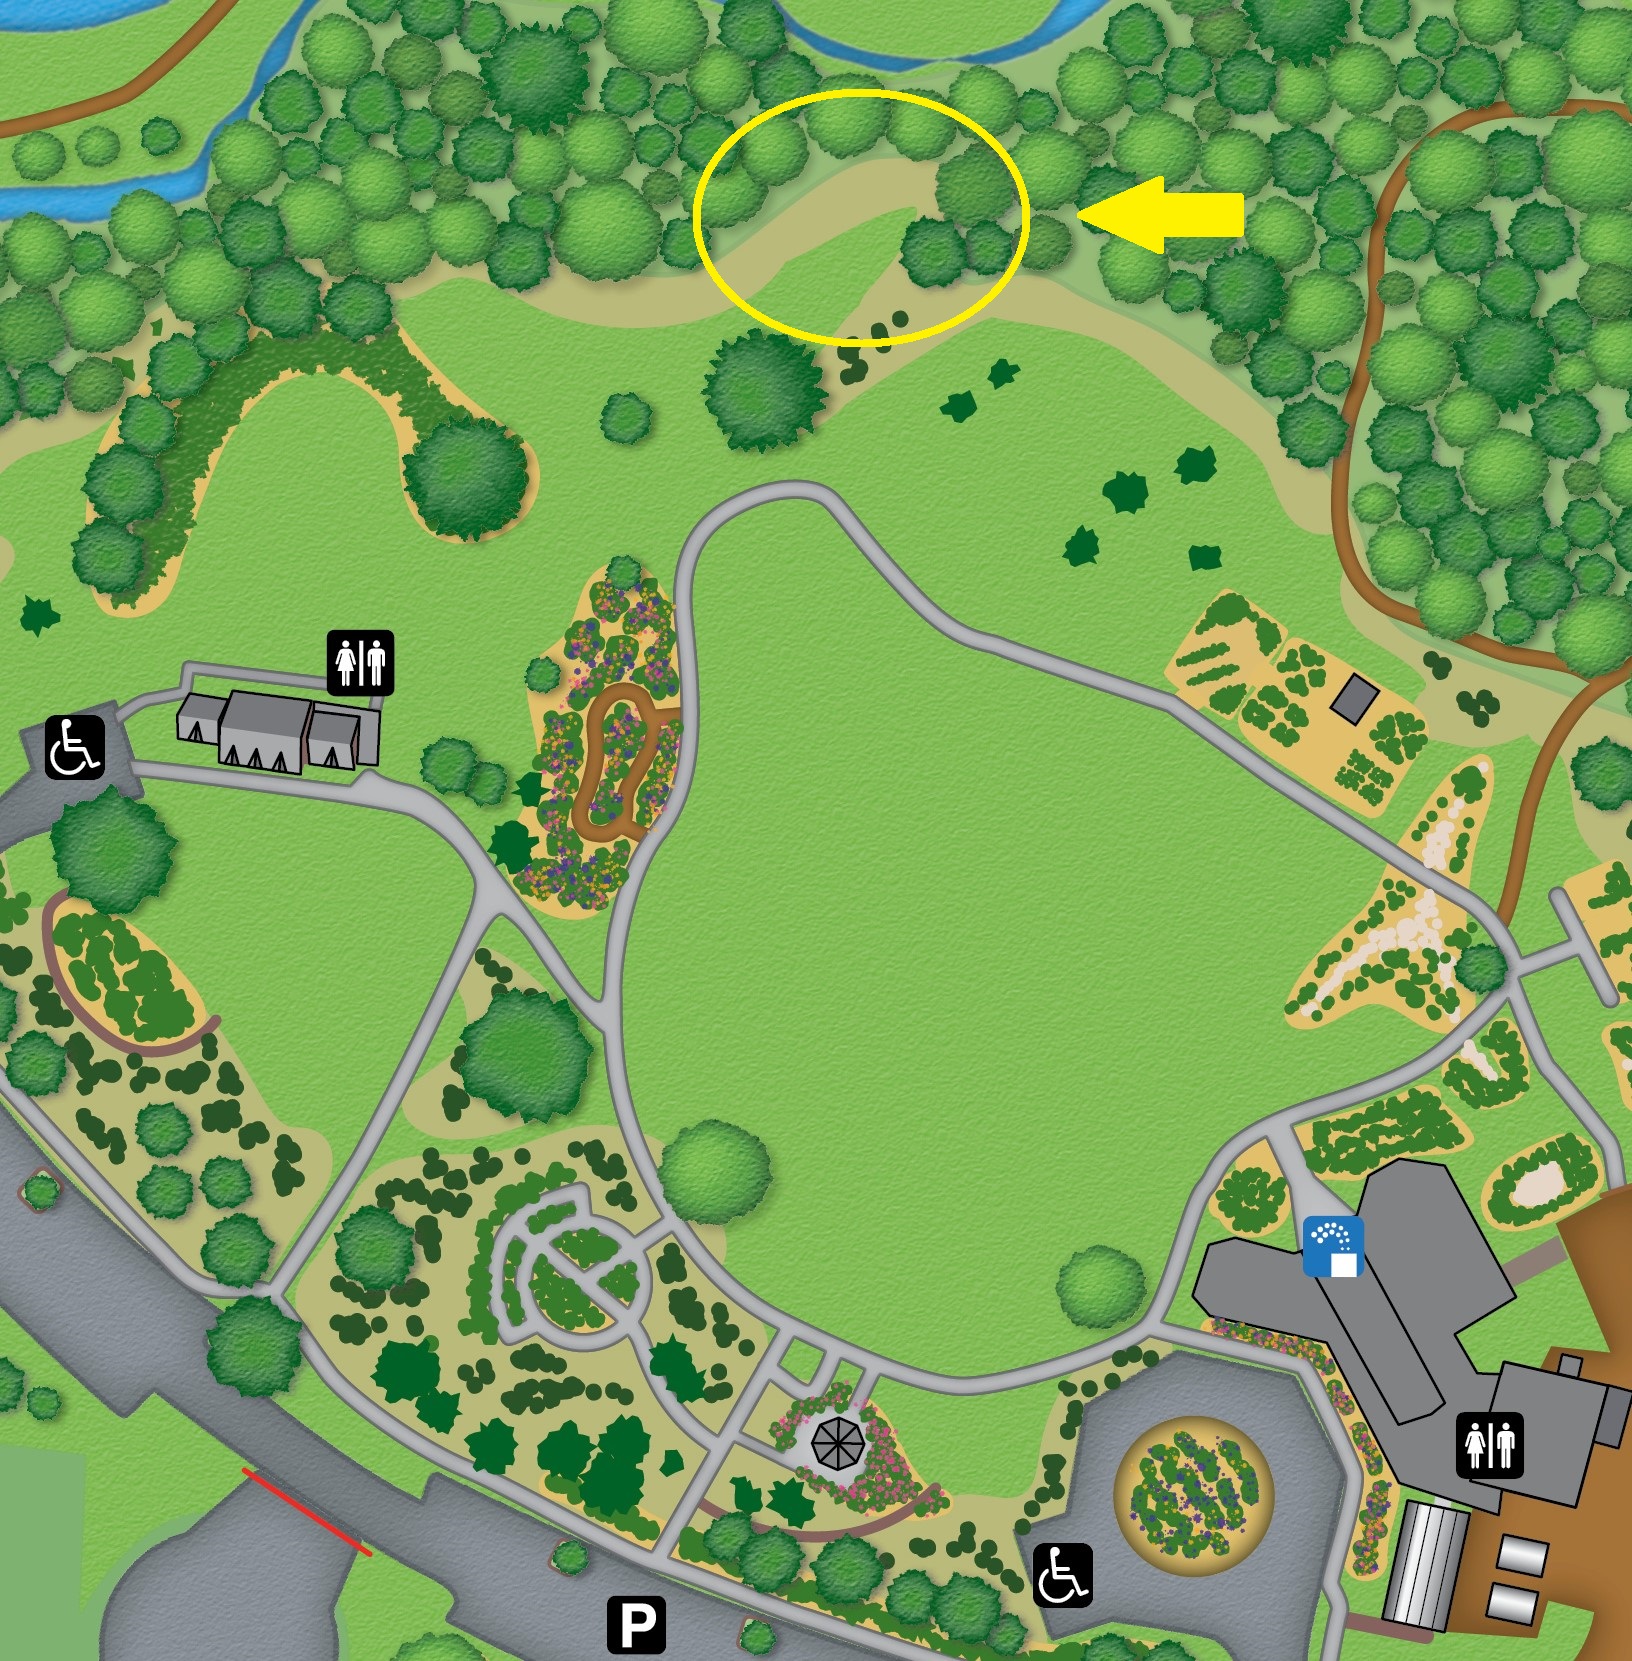 a map depicting the location of the moon gate garden project with a yellow circle